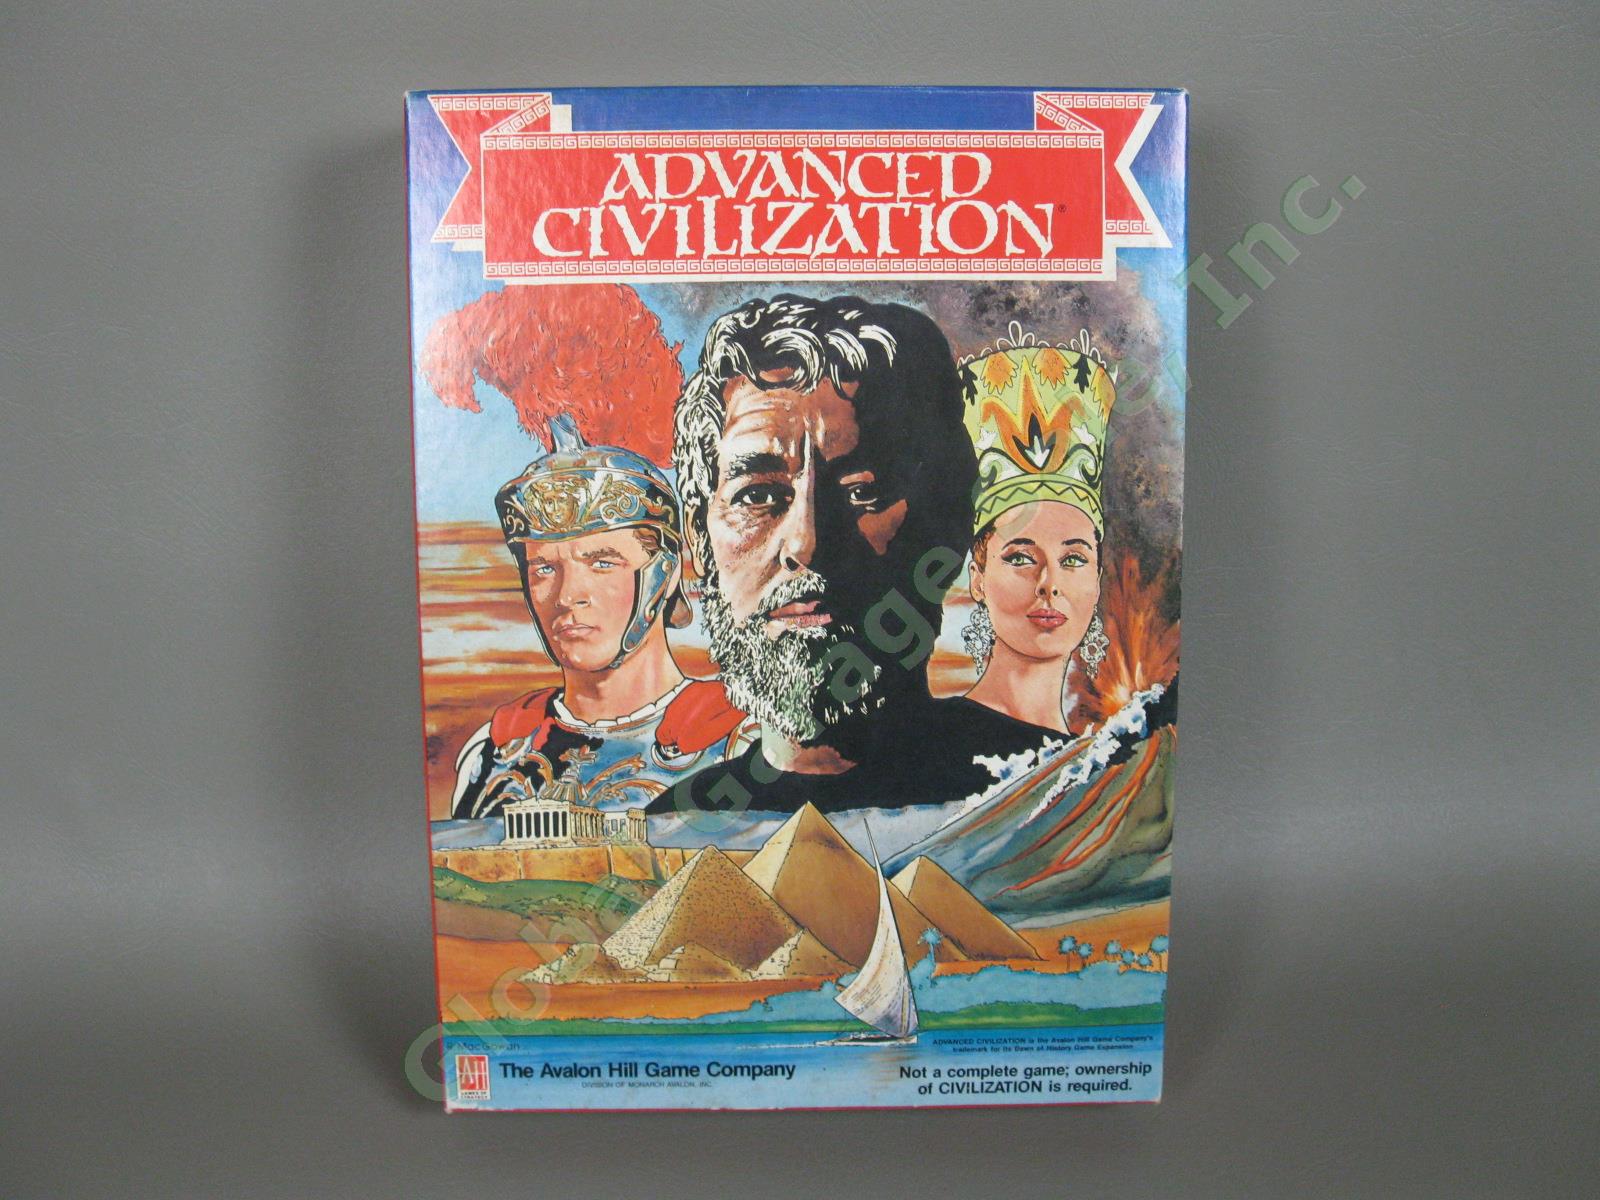 Advanced Civilization Original Game + Expansion of Heroic Age #8372 Avalon Hill